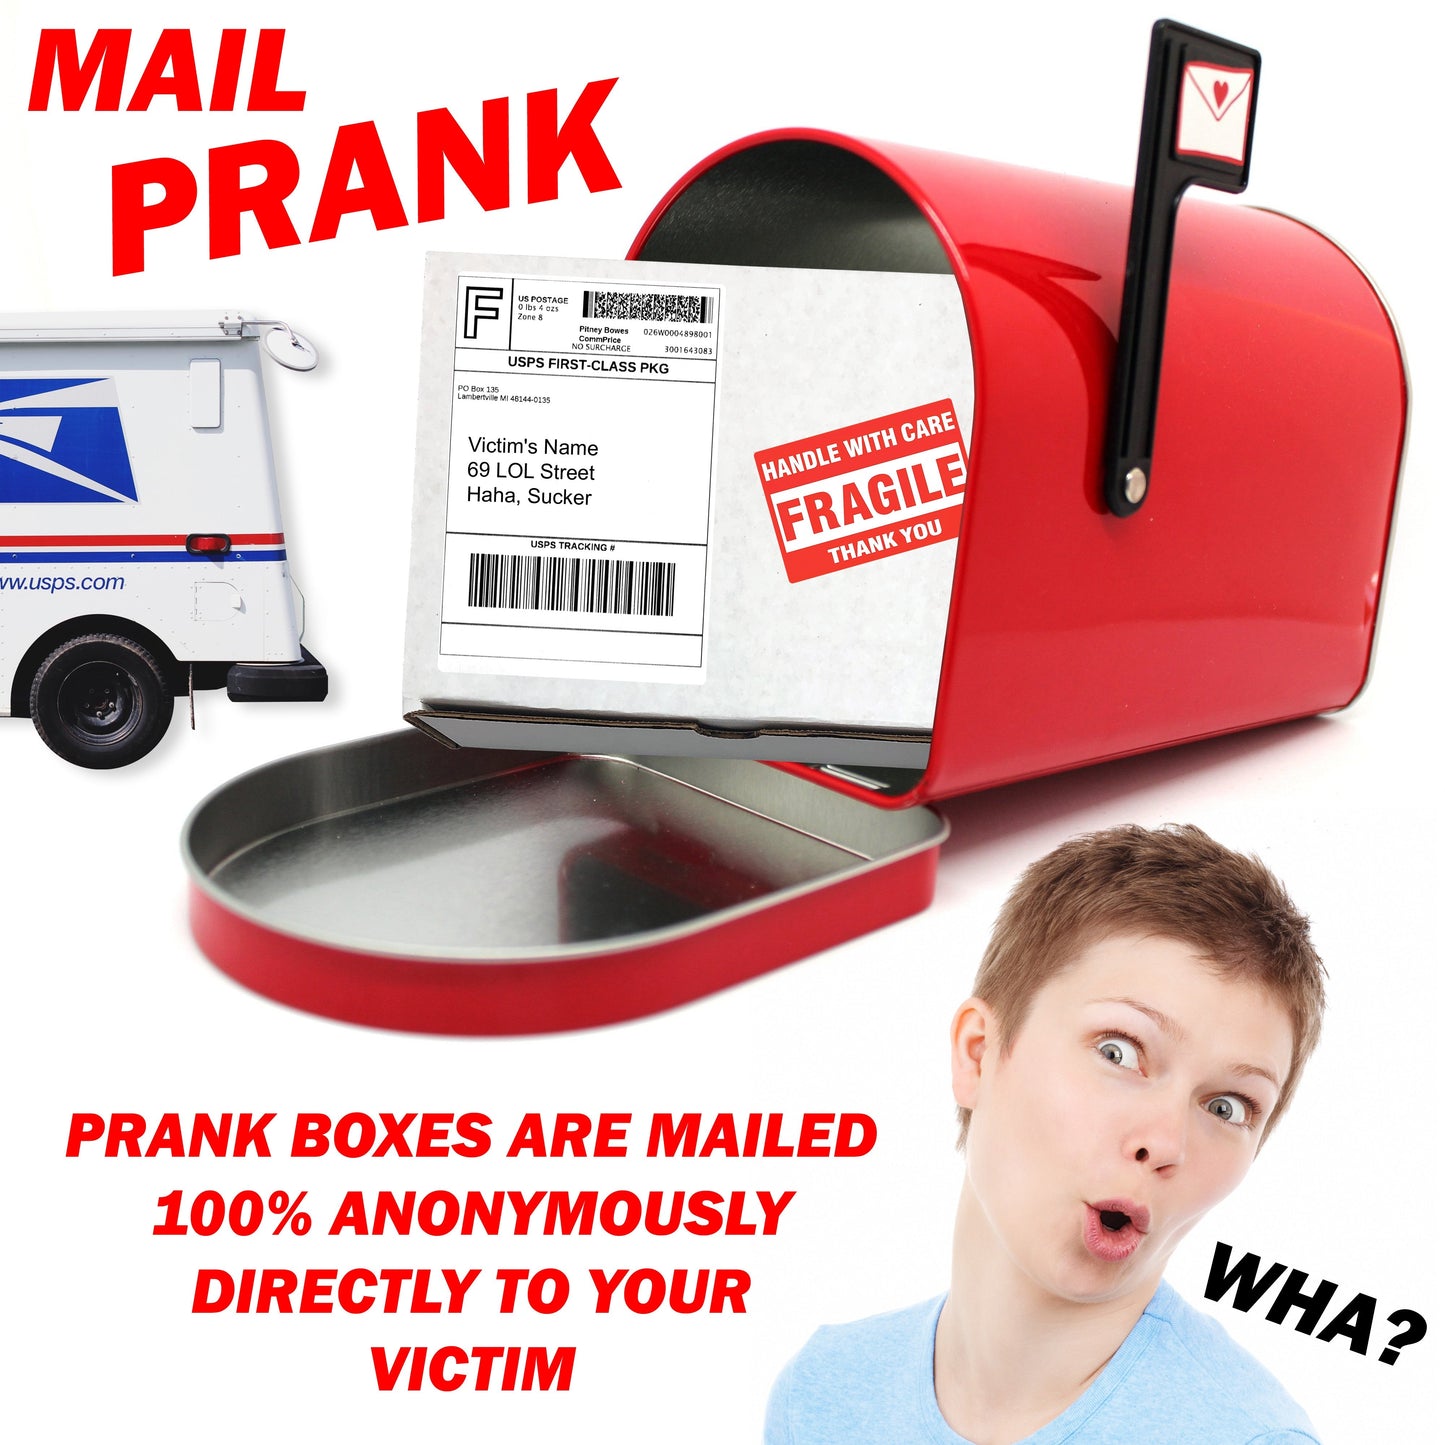 You Said You Wanted Nothing Surprise embarrassing prank box gets mailed directly to your victims 100% anonymously!